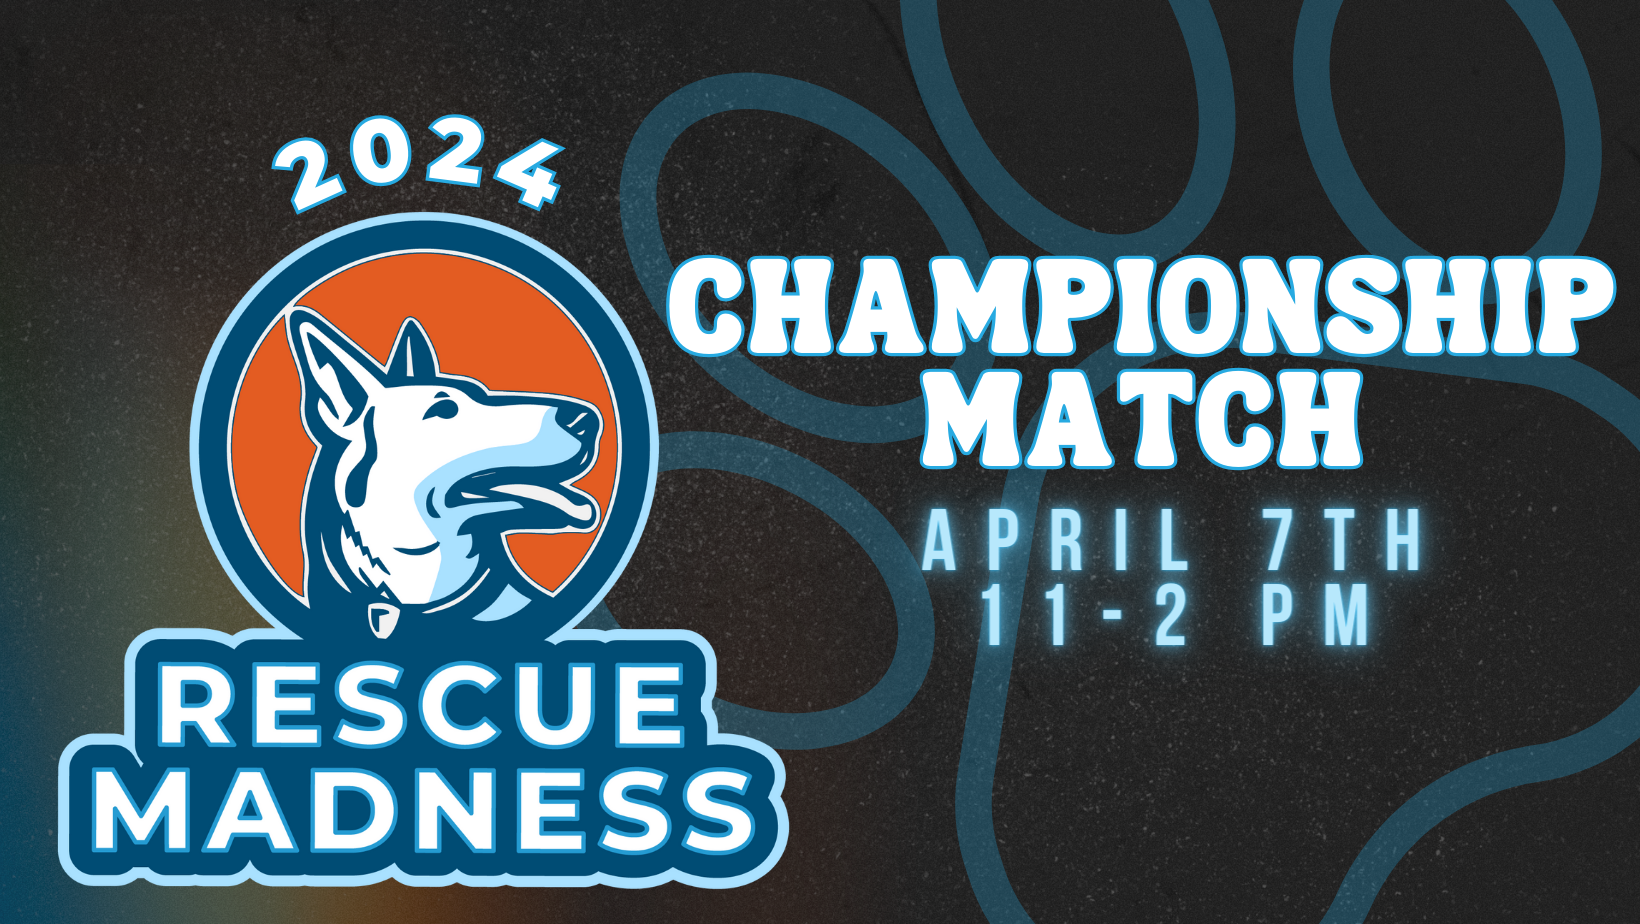 Bar K Rescue madness. championship party 2024. April 7th from 11 to 2pm.